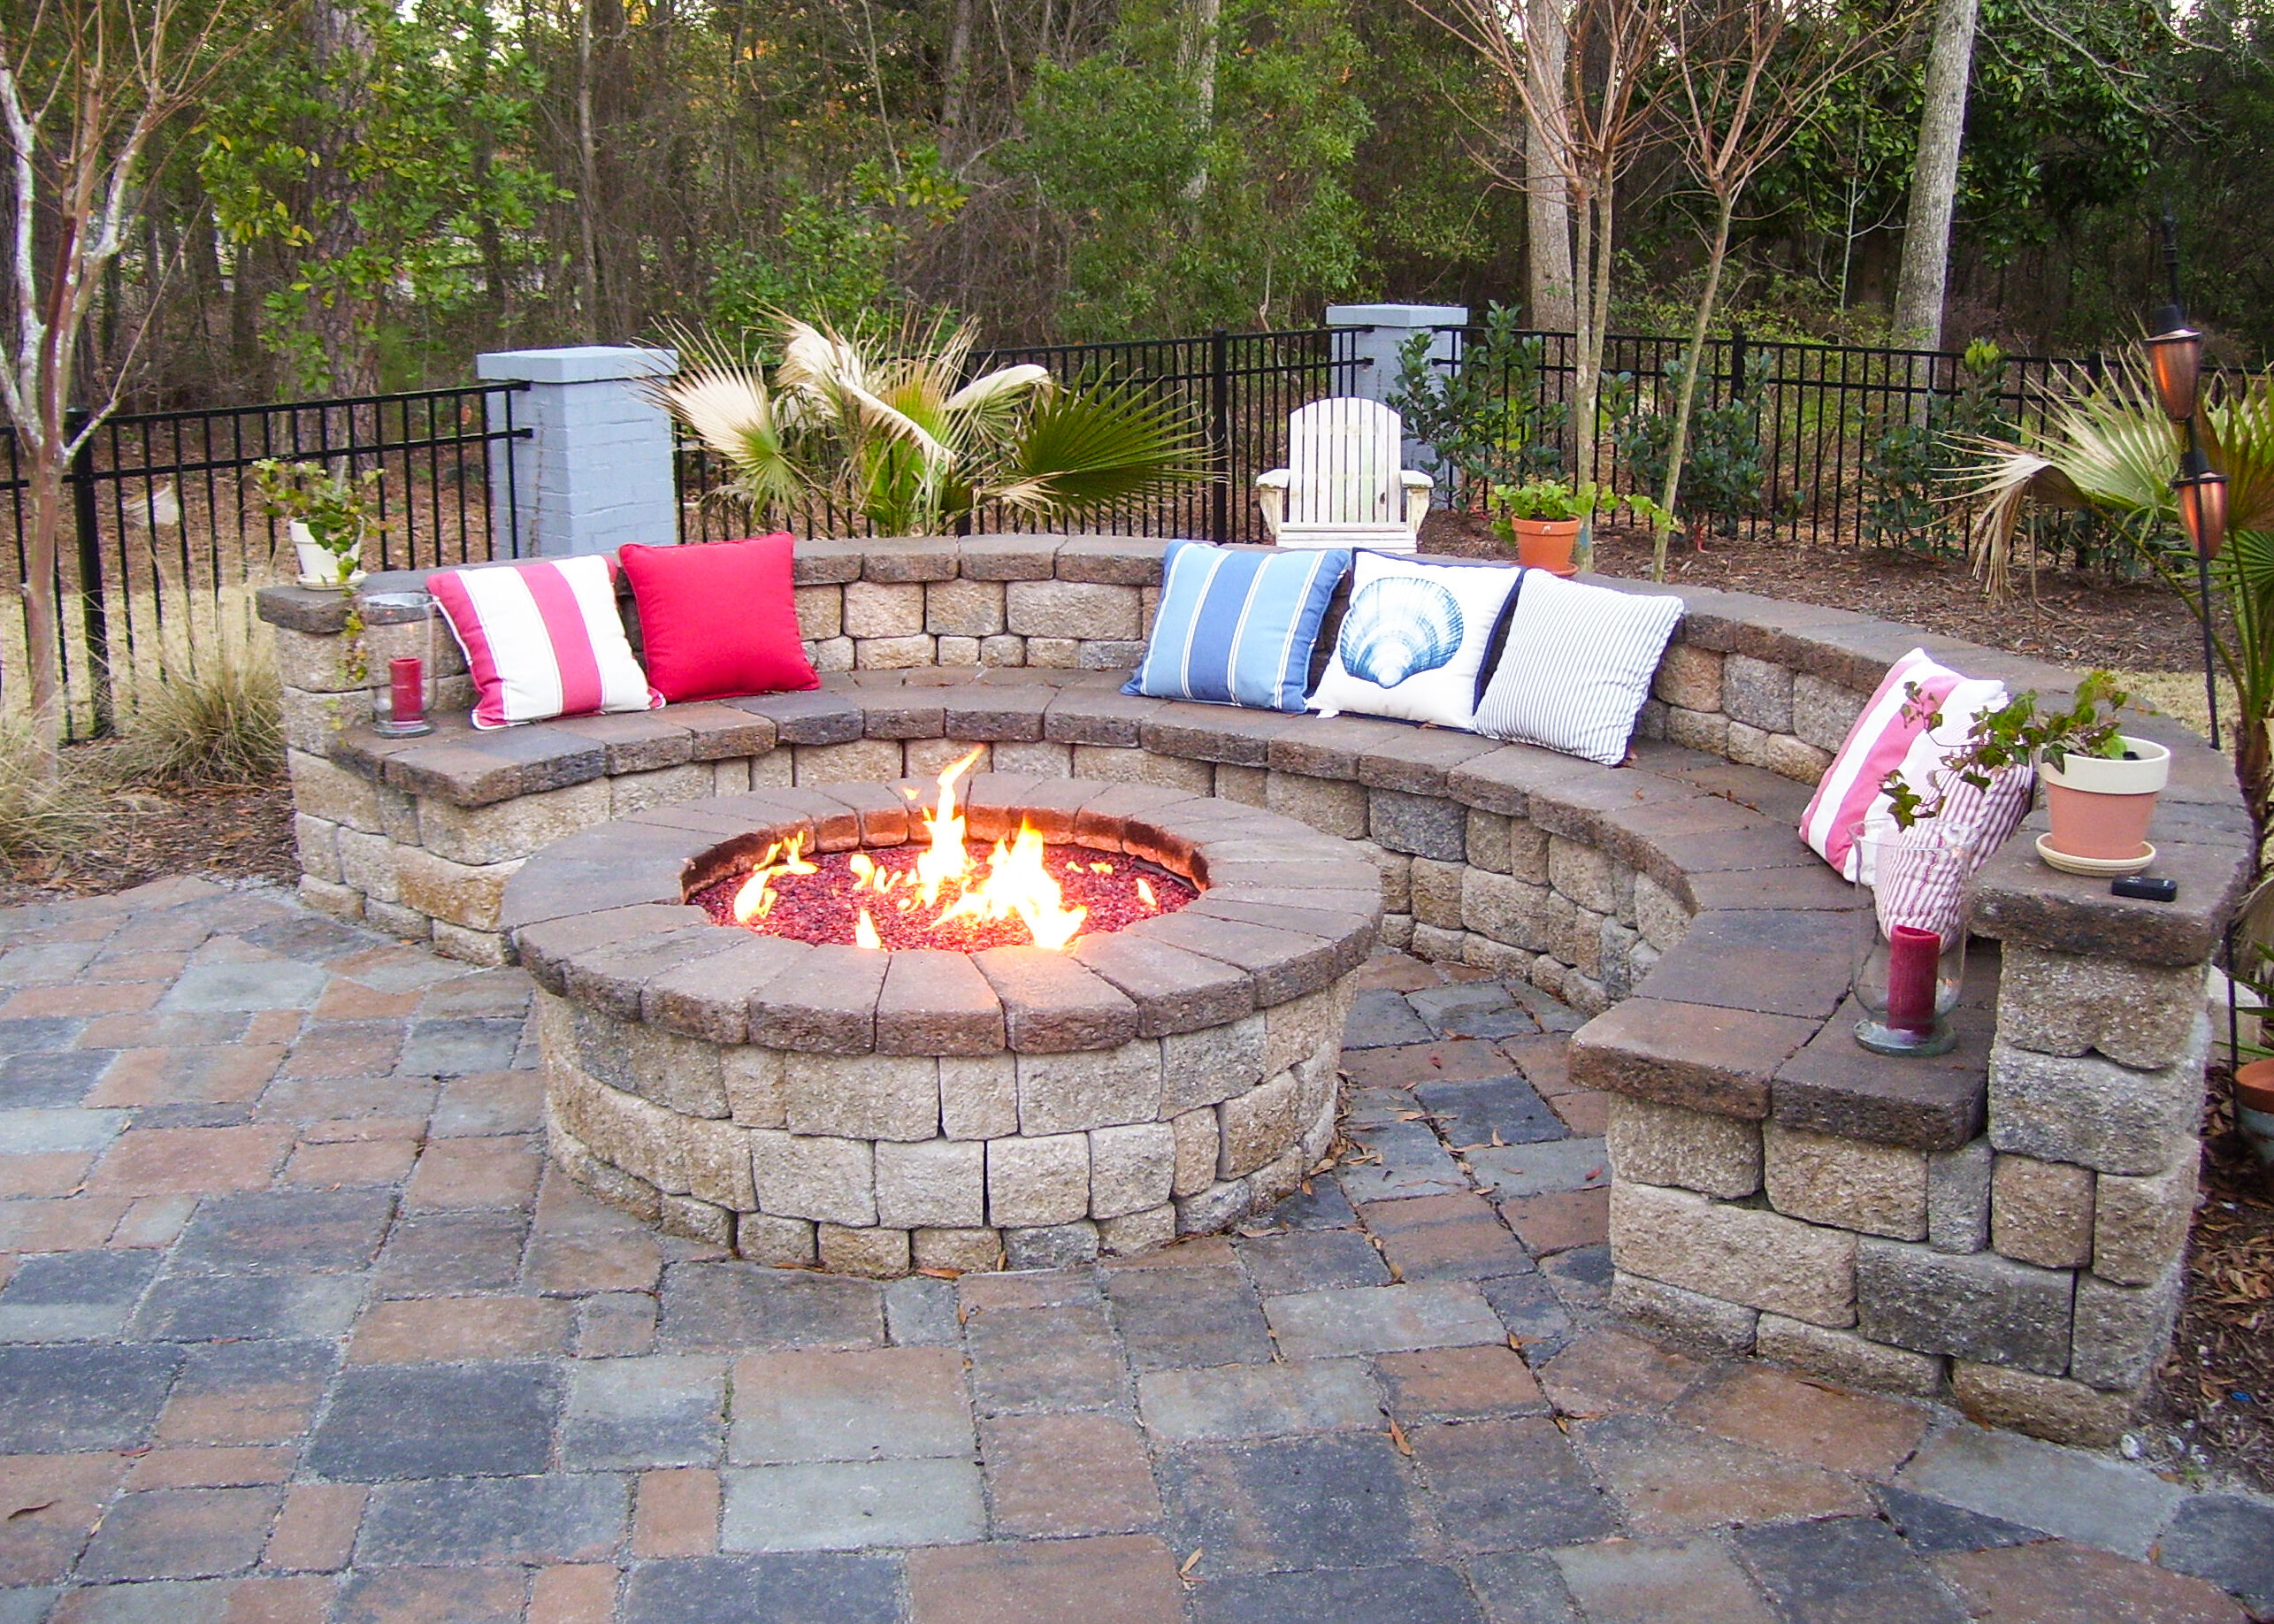 3 Easy Diy Fire Pit Ideas, How To Build A Round Fire Pit Out Of Bricks